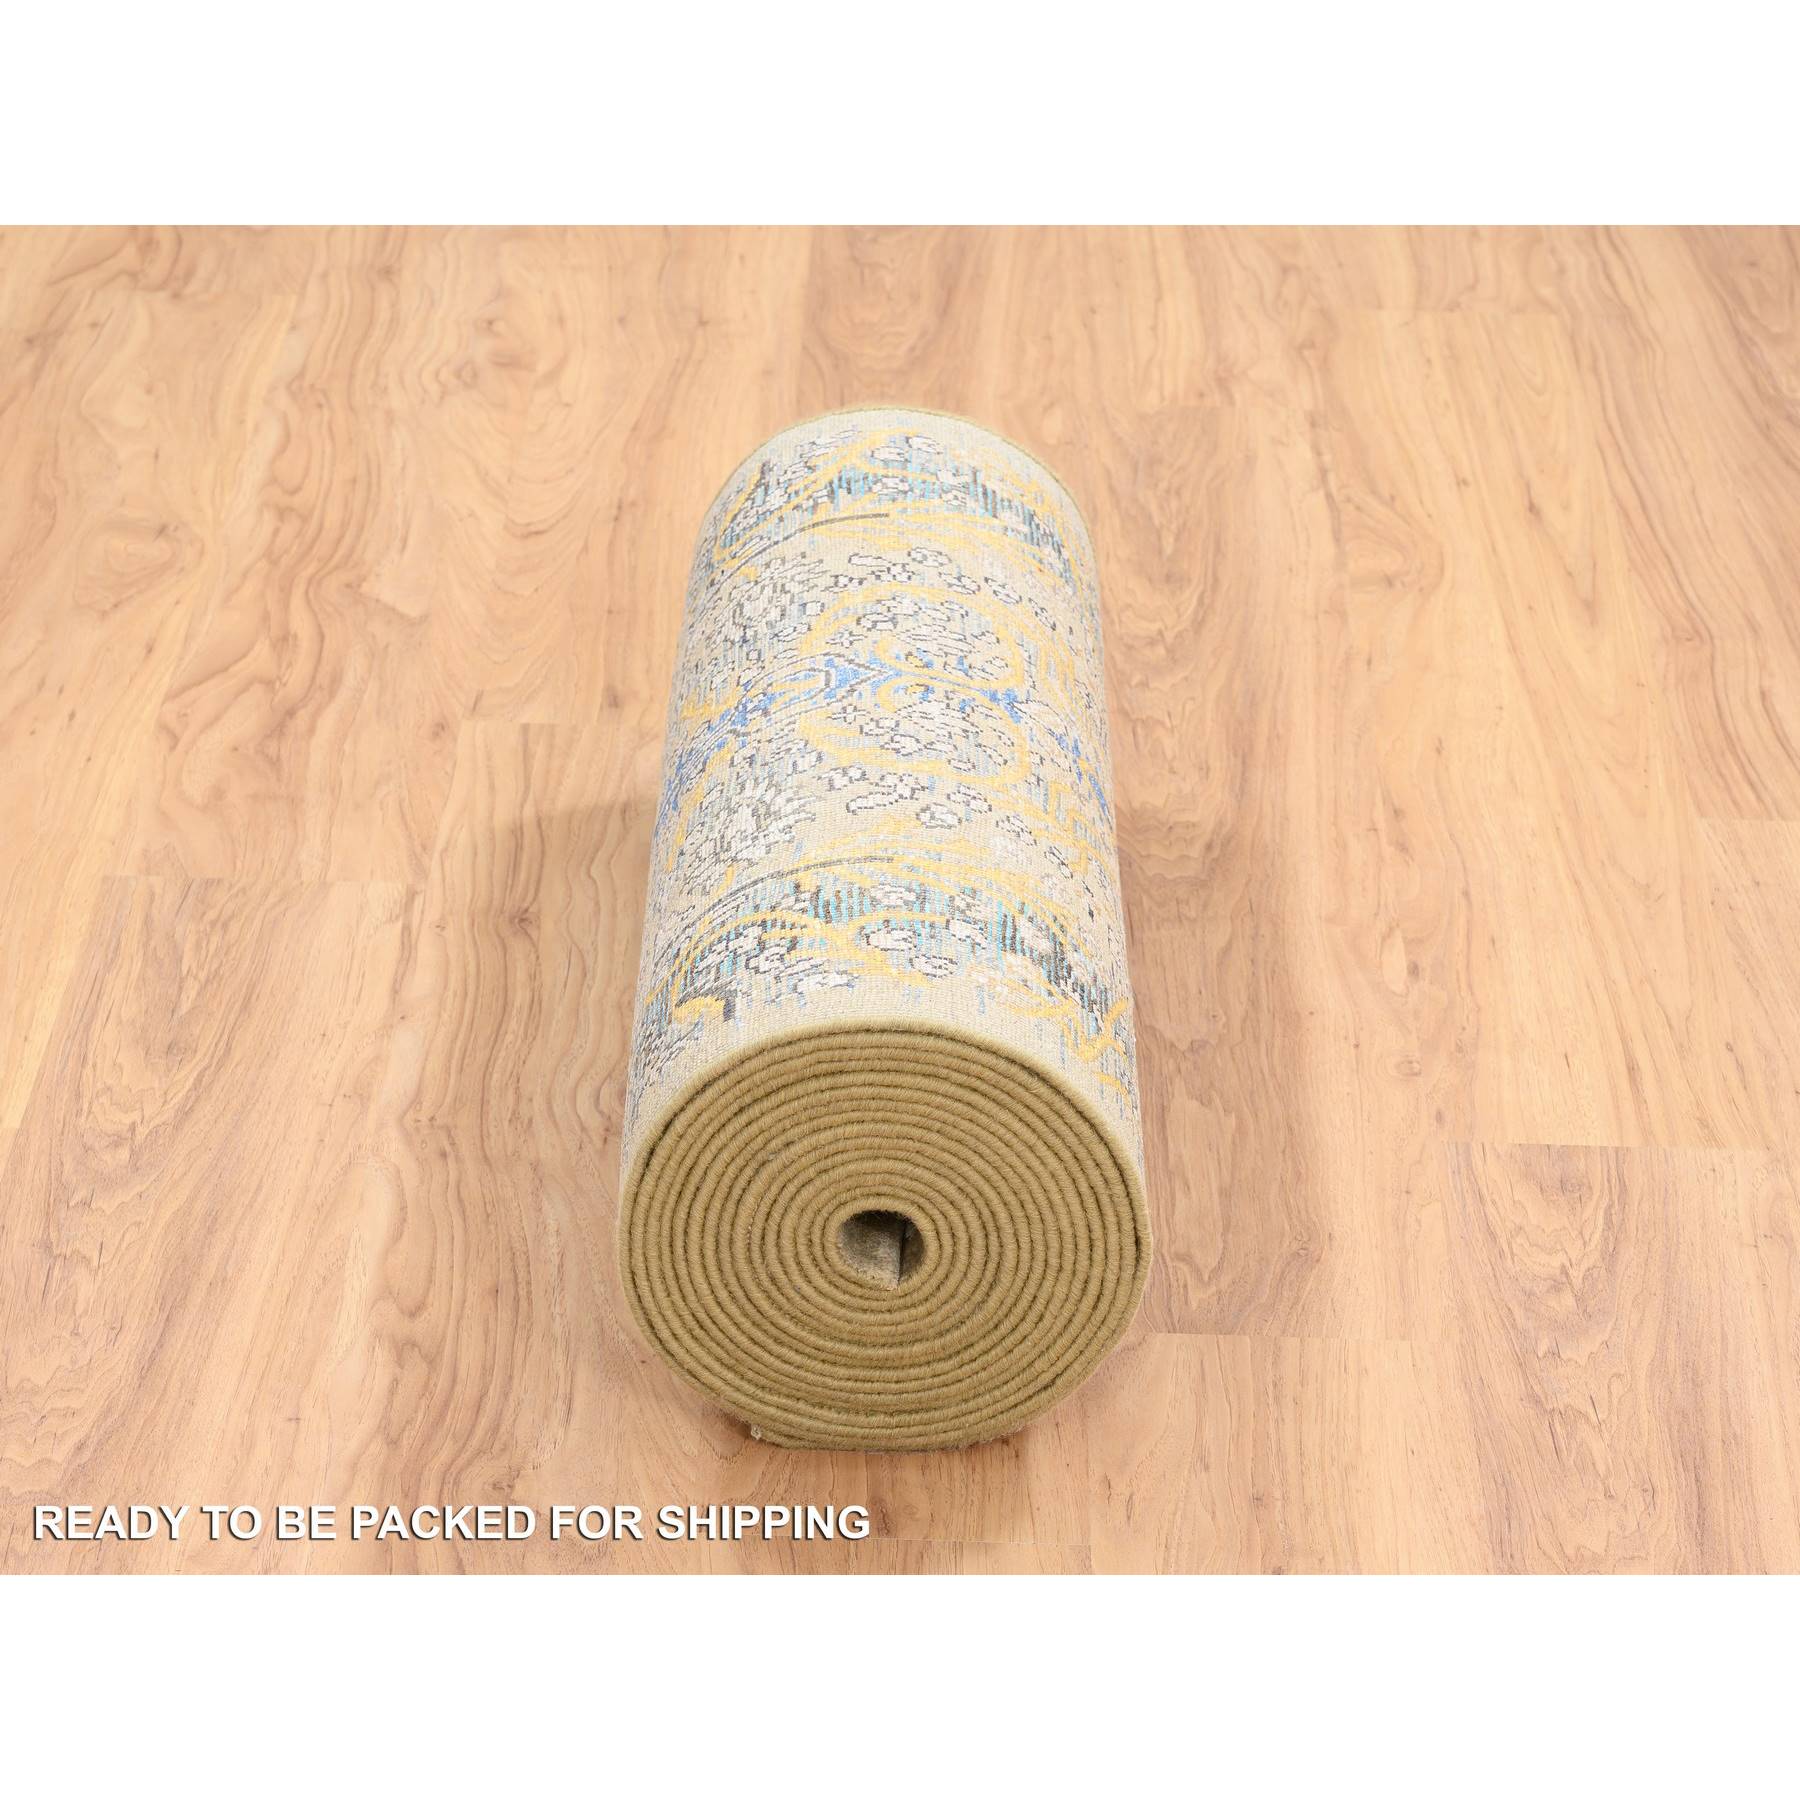 Transitional-Hand-Knotted-Rug-322220